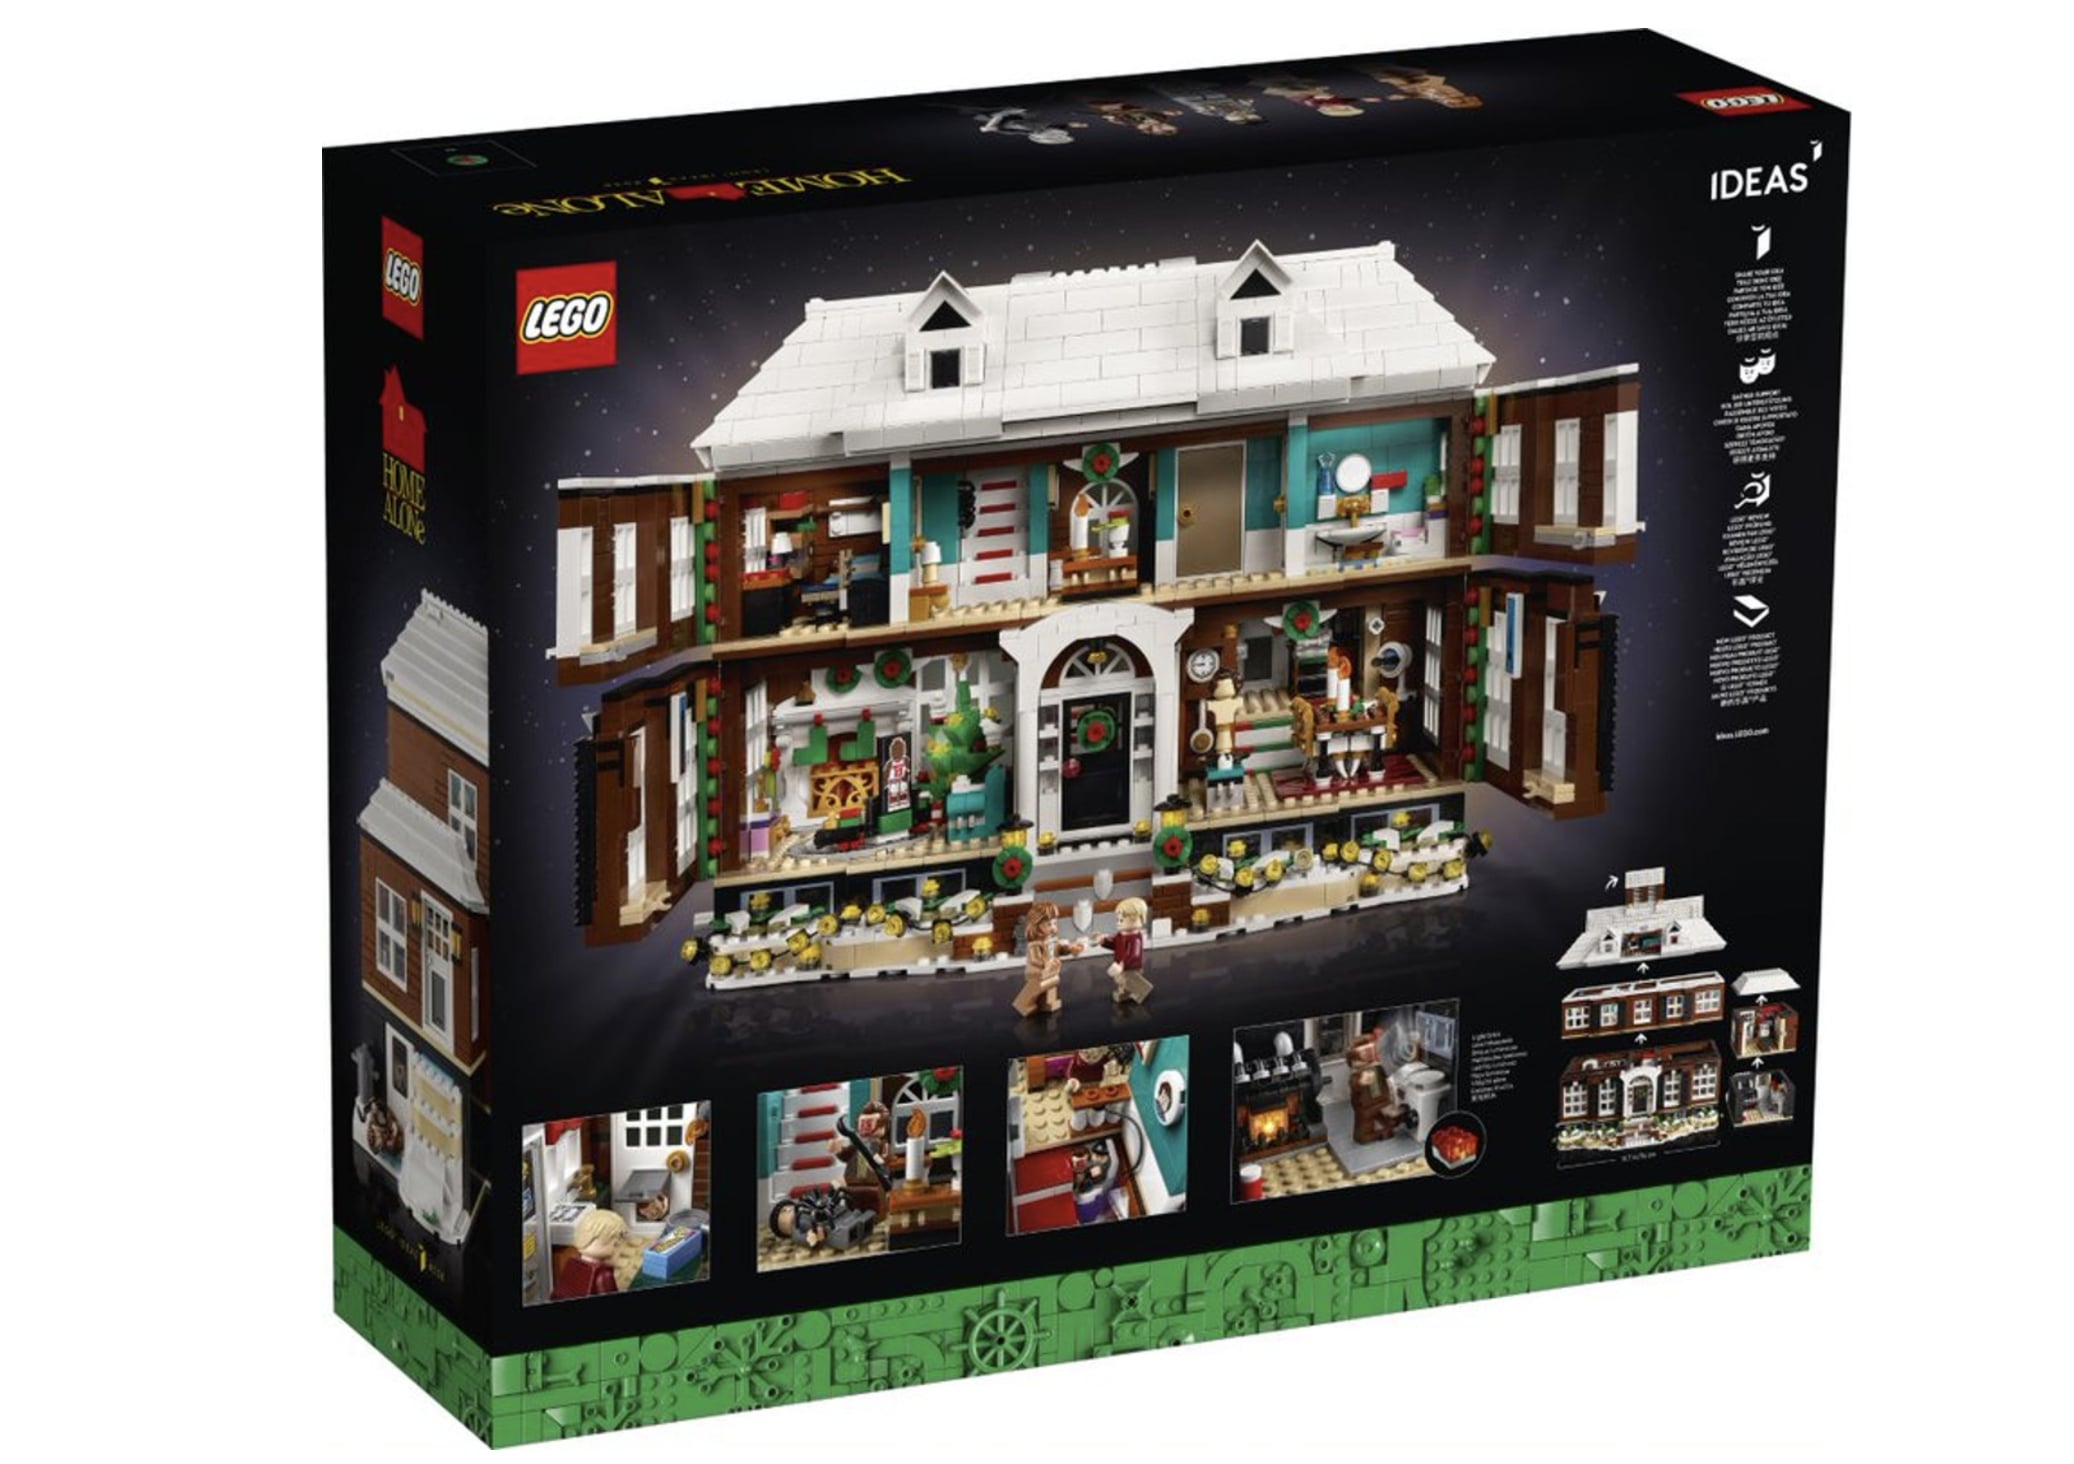 Lego Is Selling a $250 Home Alone Set